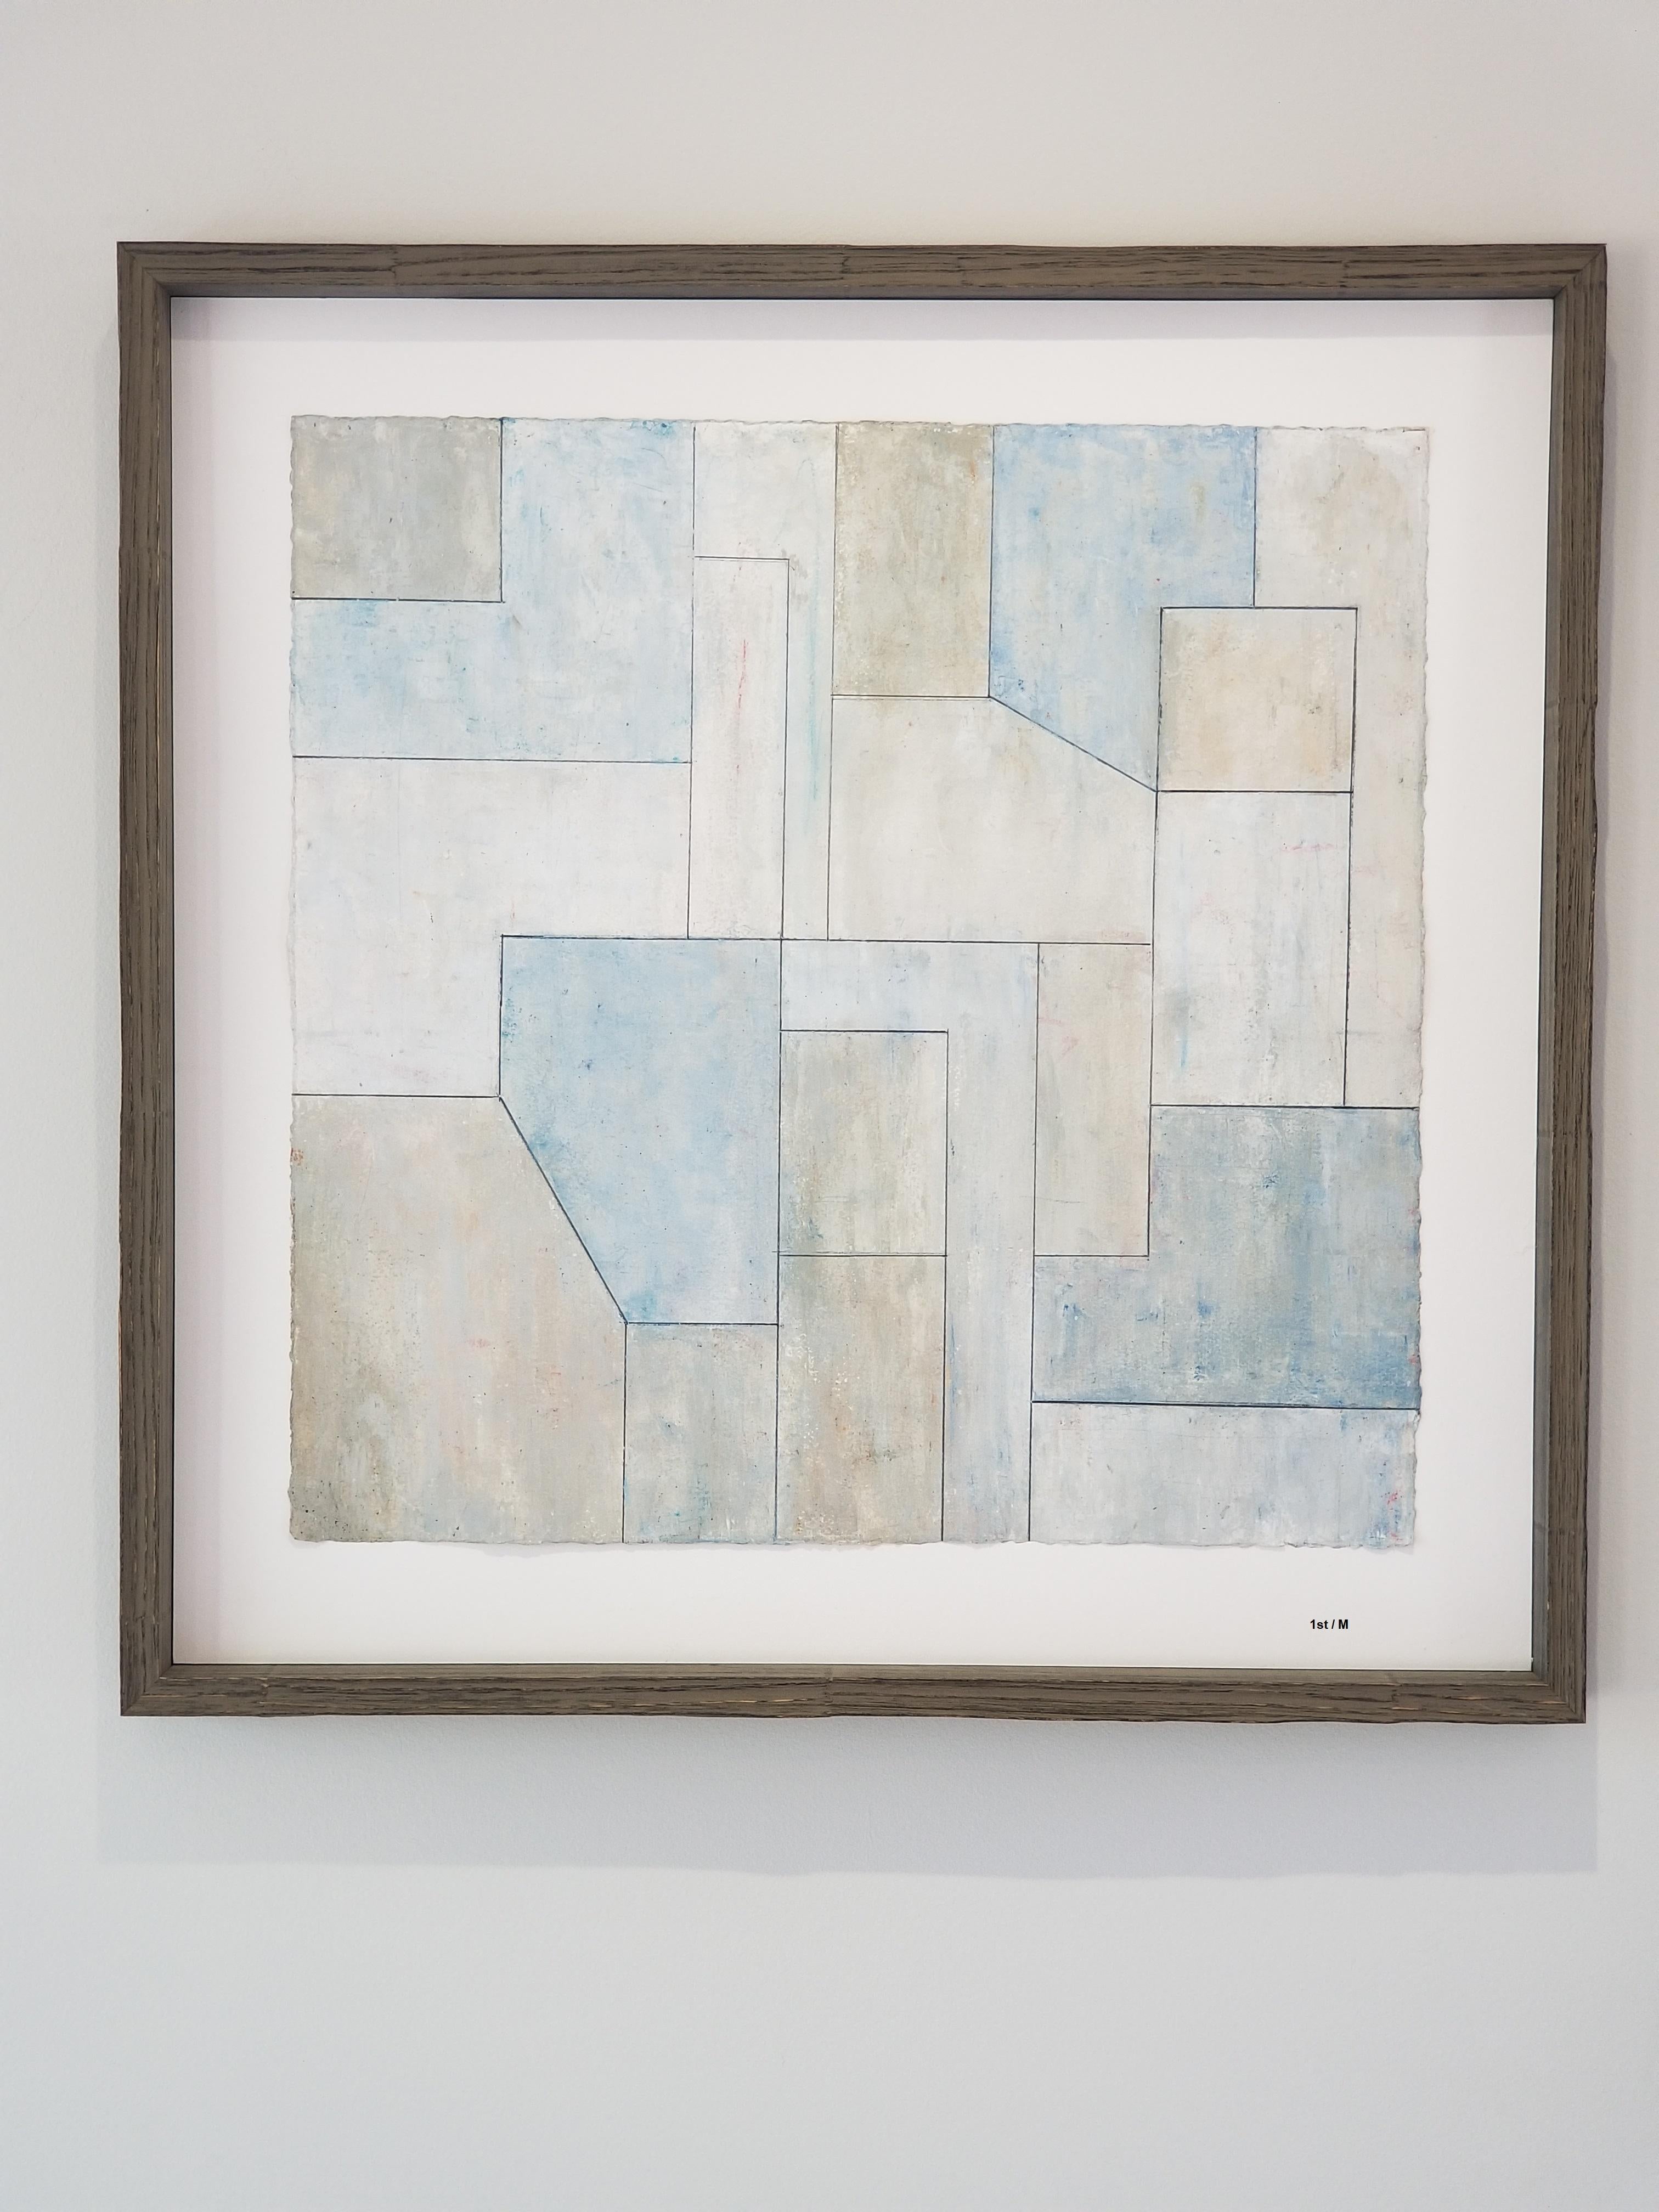 Stephen Cimini Abstract Painting - Archival pigment print - framed in natural wood - Blue and Gray 1